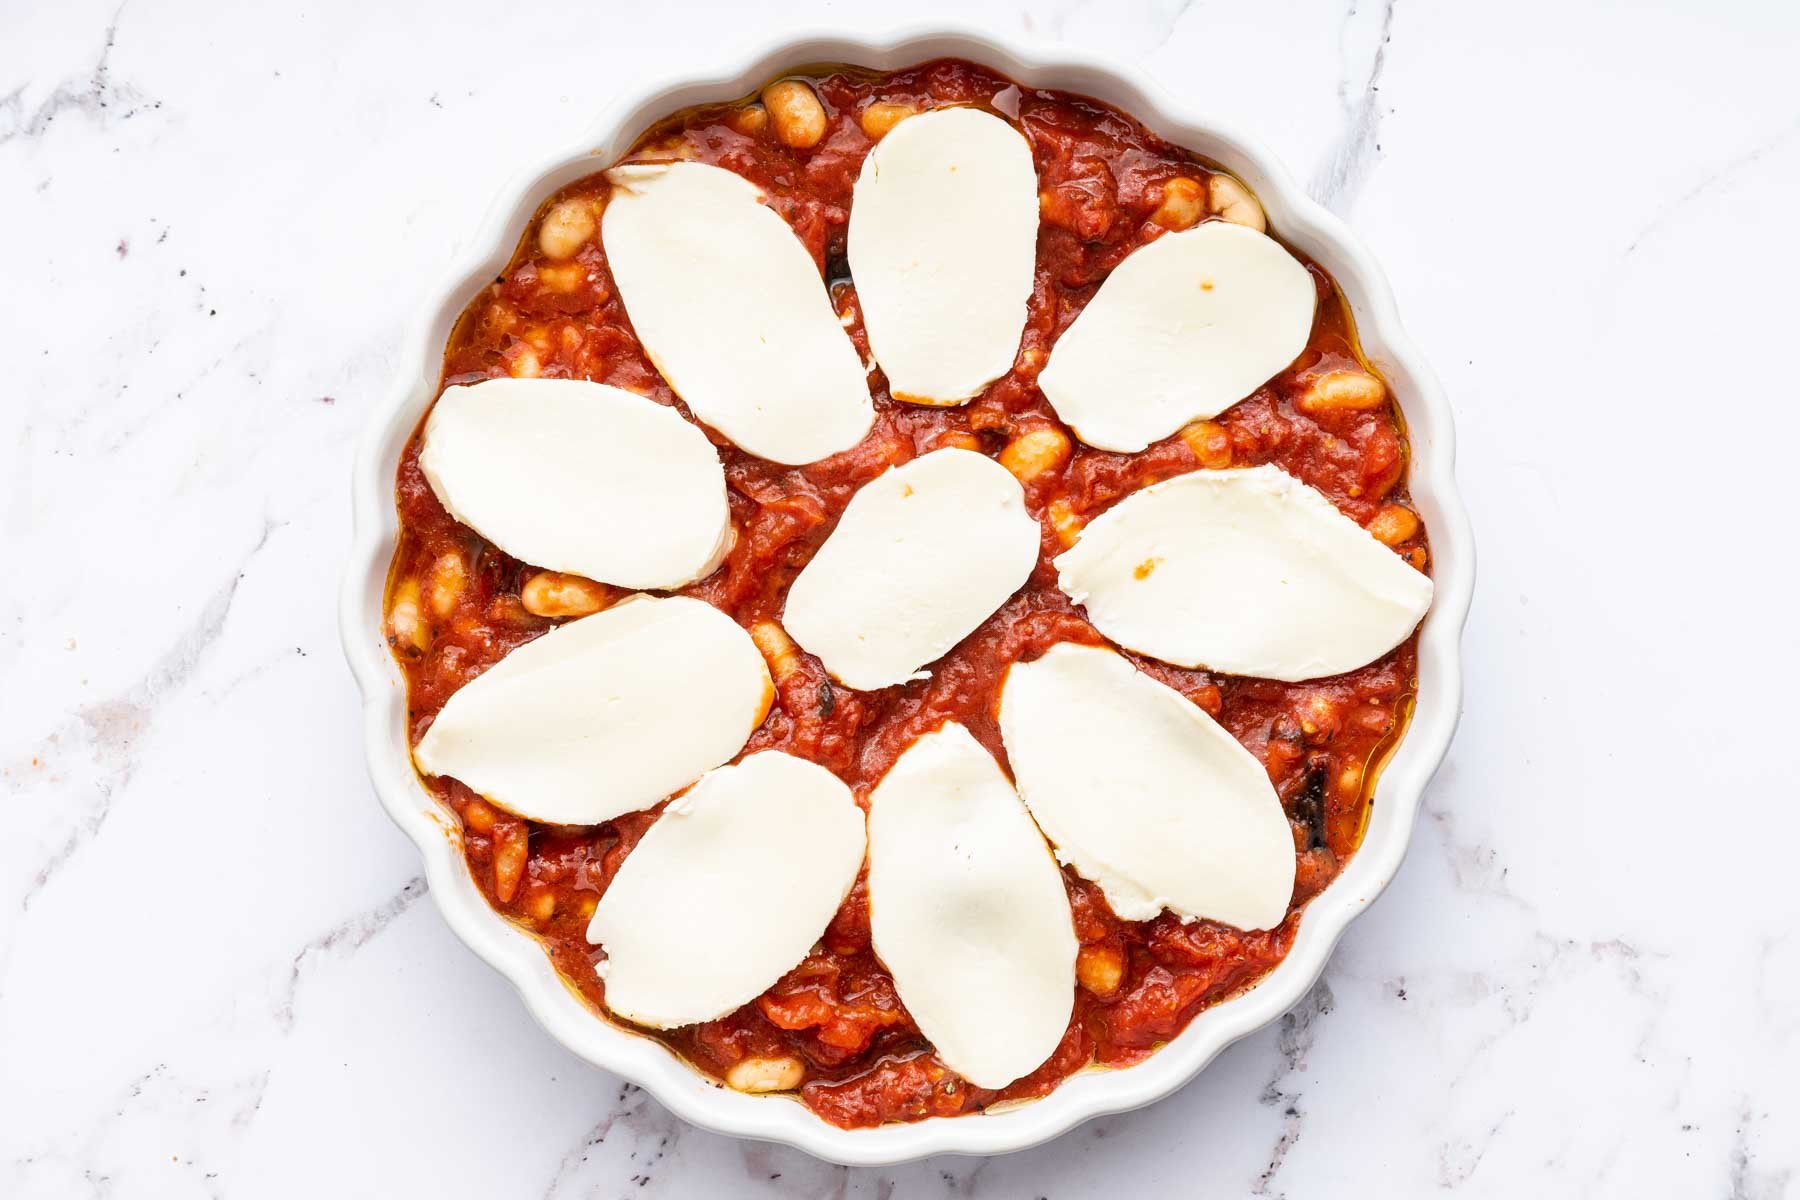 Round dish with red sauce and slices of oval mozzarella cheese on top.